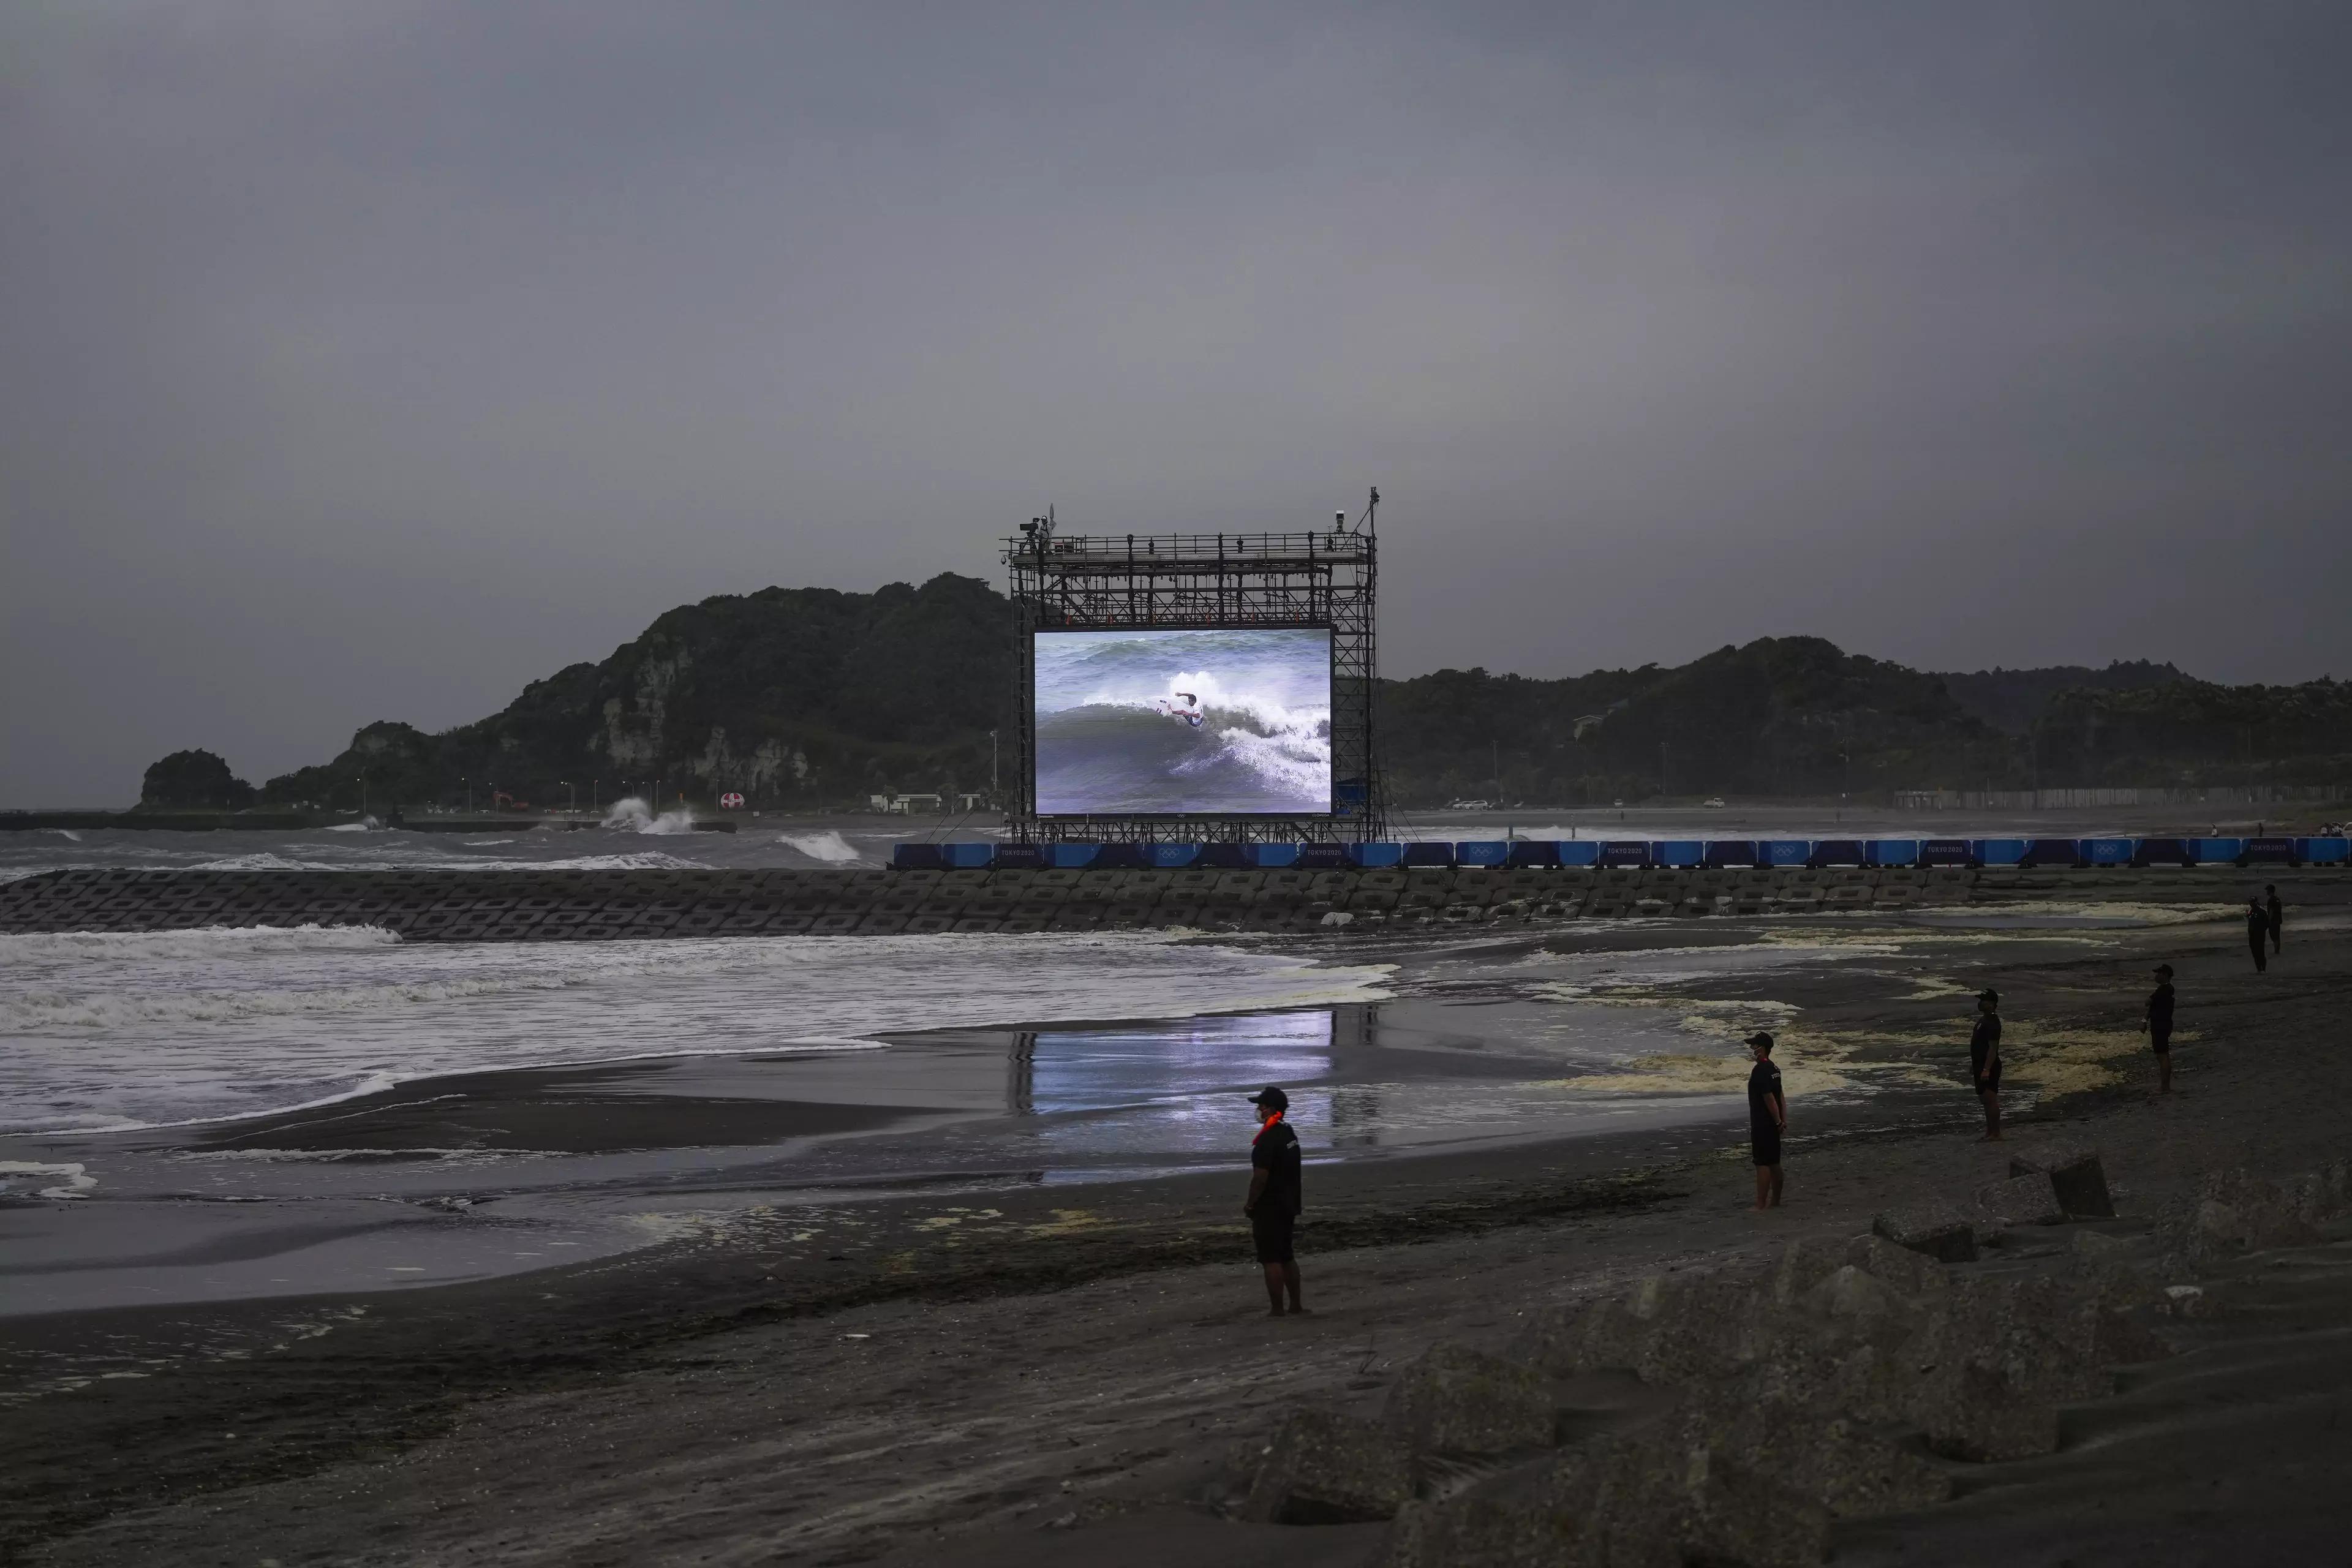 A giant screen displays the third round of men's surfing competition at the 2020 Summer Olympics, Monday, July 26, 2021, at Tsurigasaki beach in Ichinomiya, Japan. (